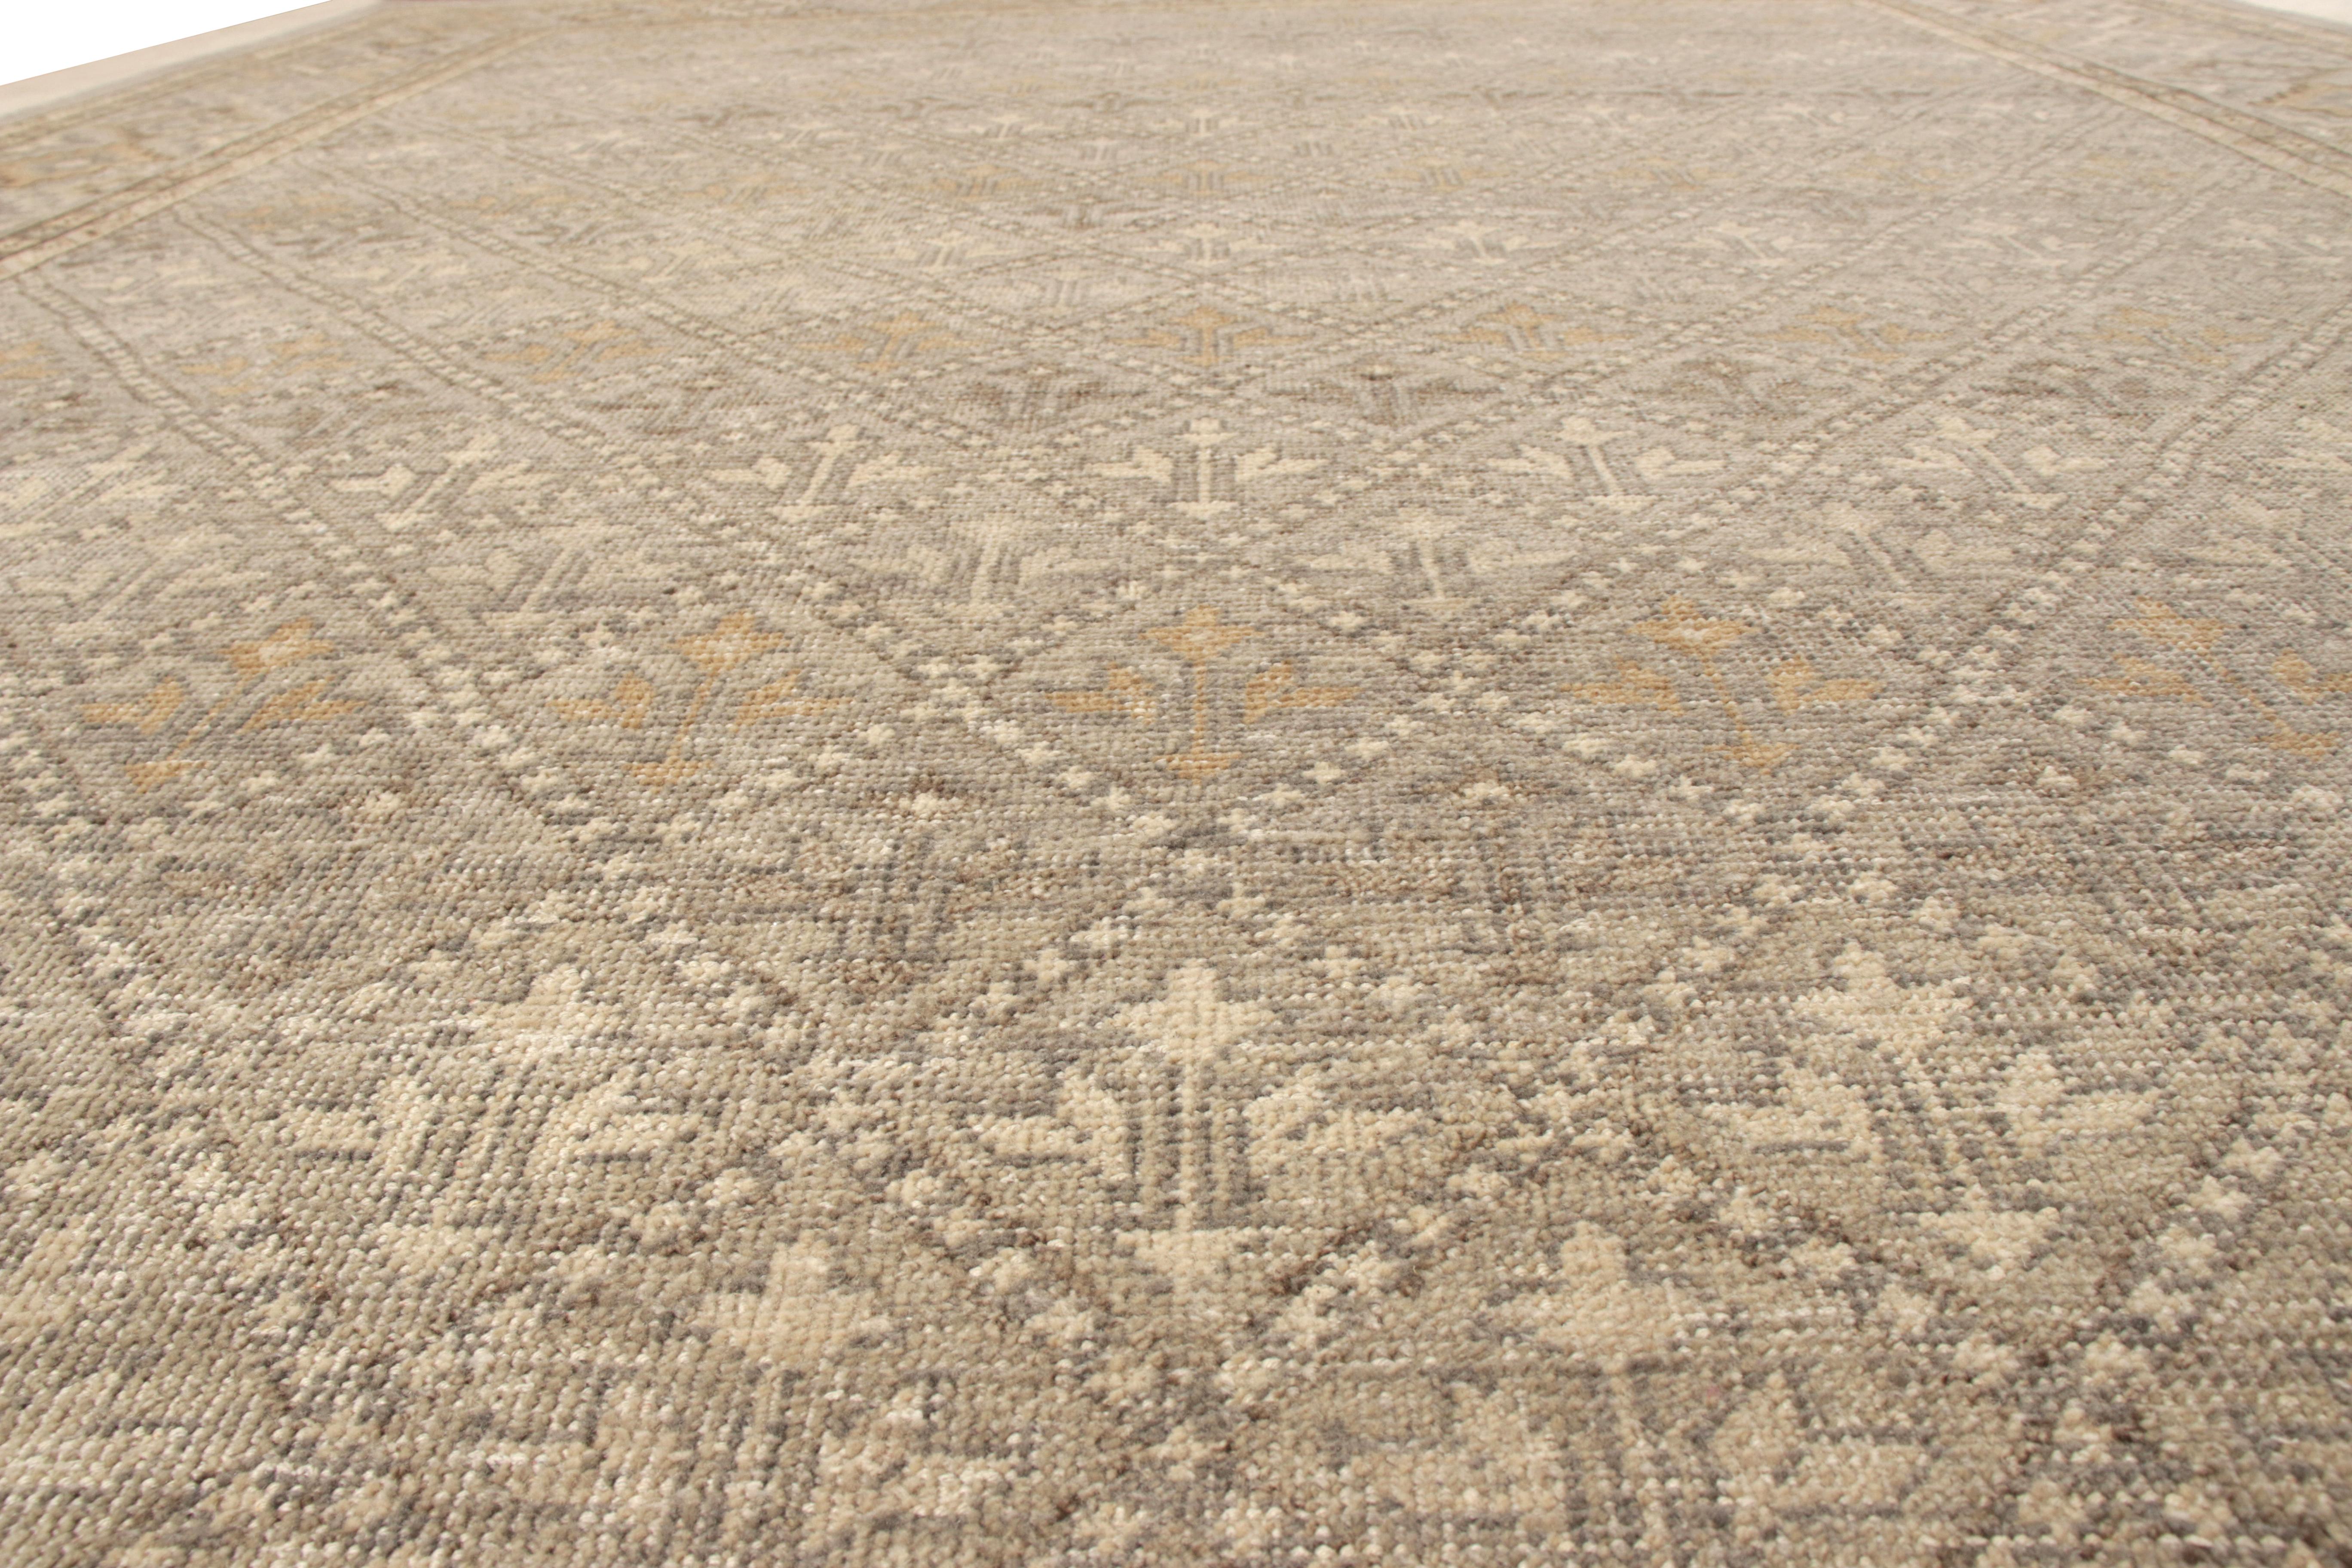 Indian Rug & Kilim’s Distressed Style Rug in Beige-Brown and Gray Geometric Pattern For Sale